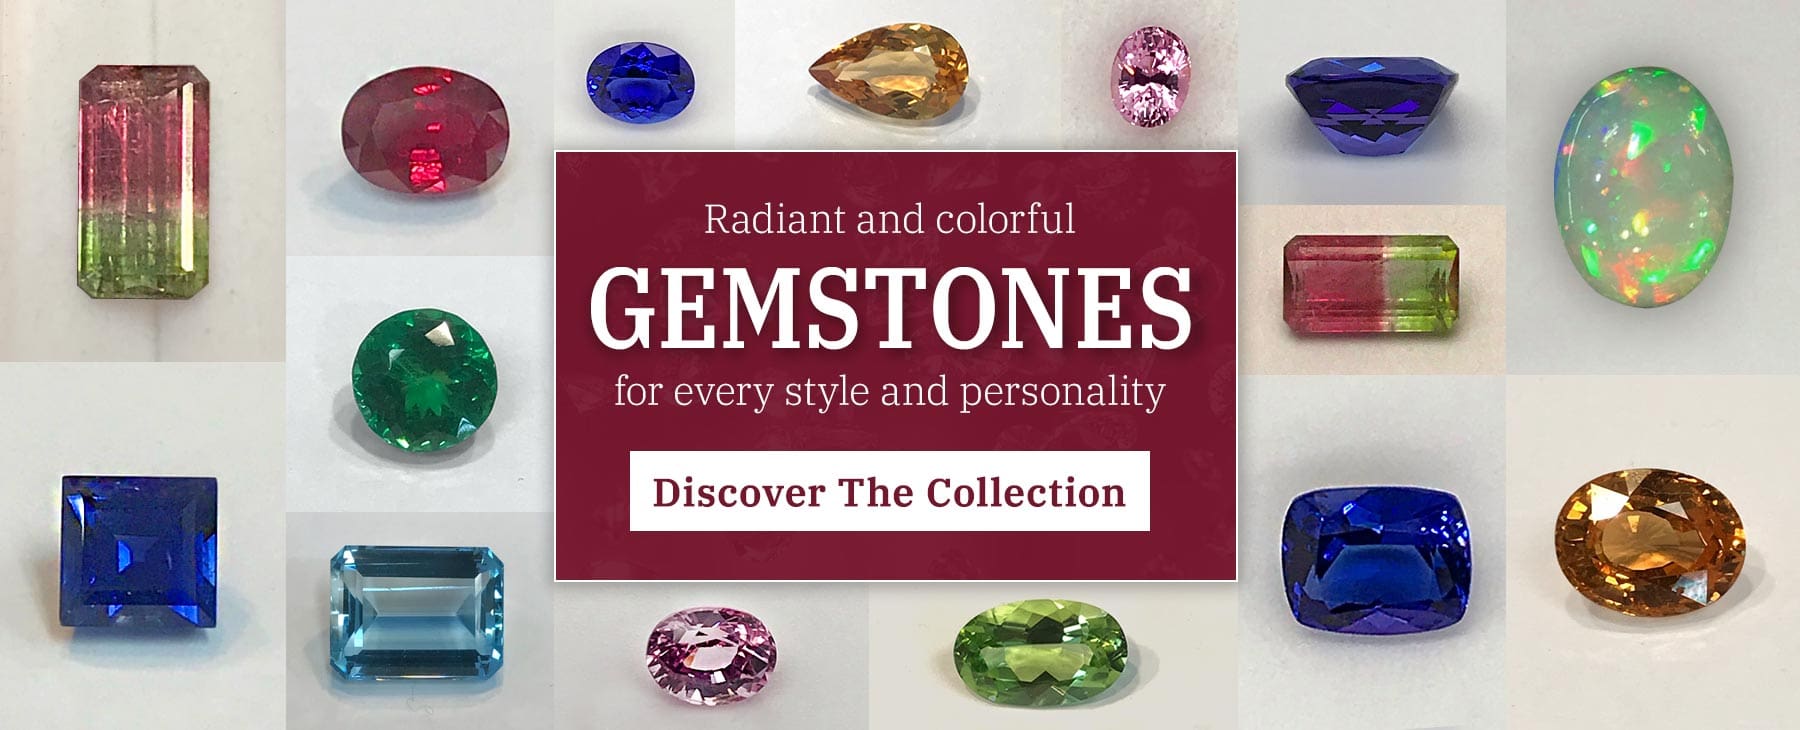 Shop Loose Gemstones At Henry's Jewelers In Warrington, PA At Henry's Jewelers